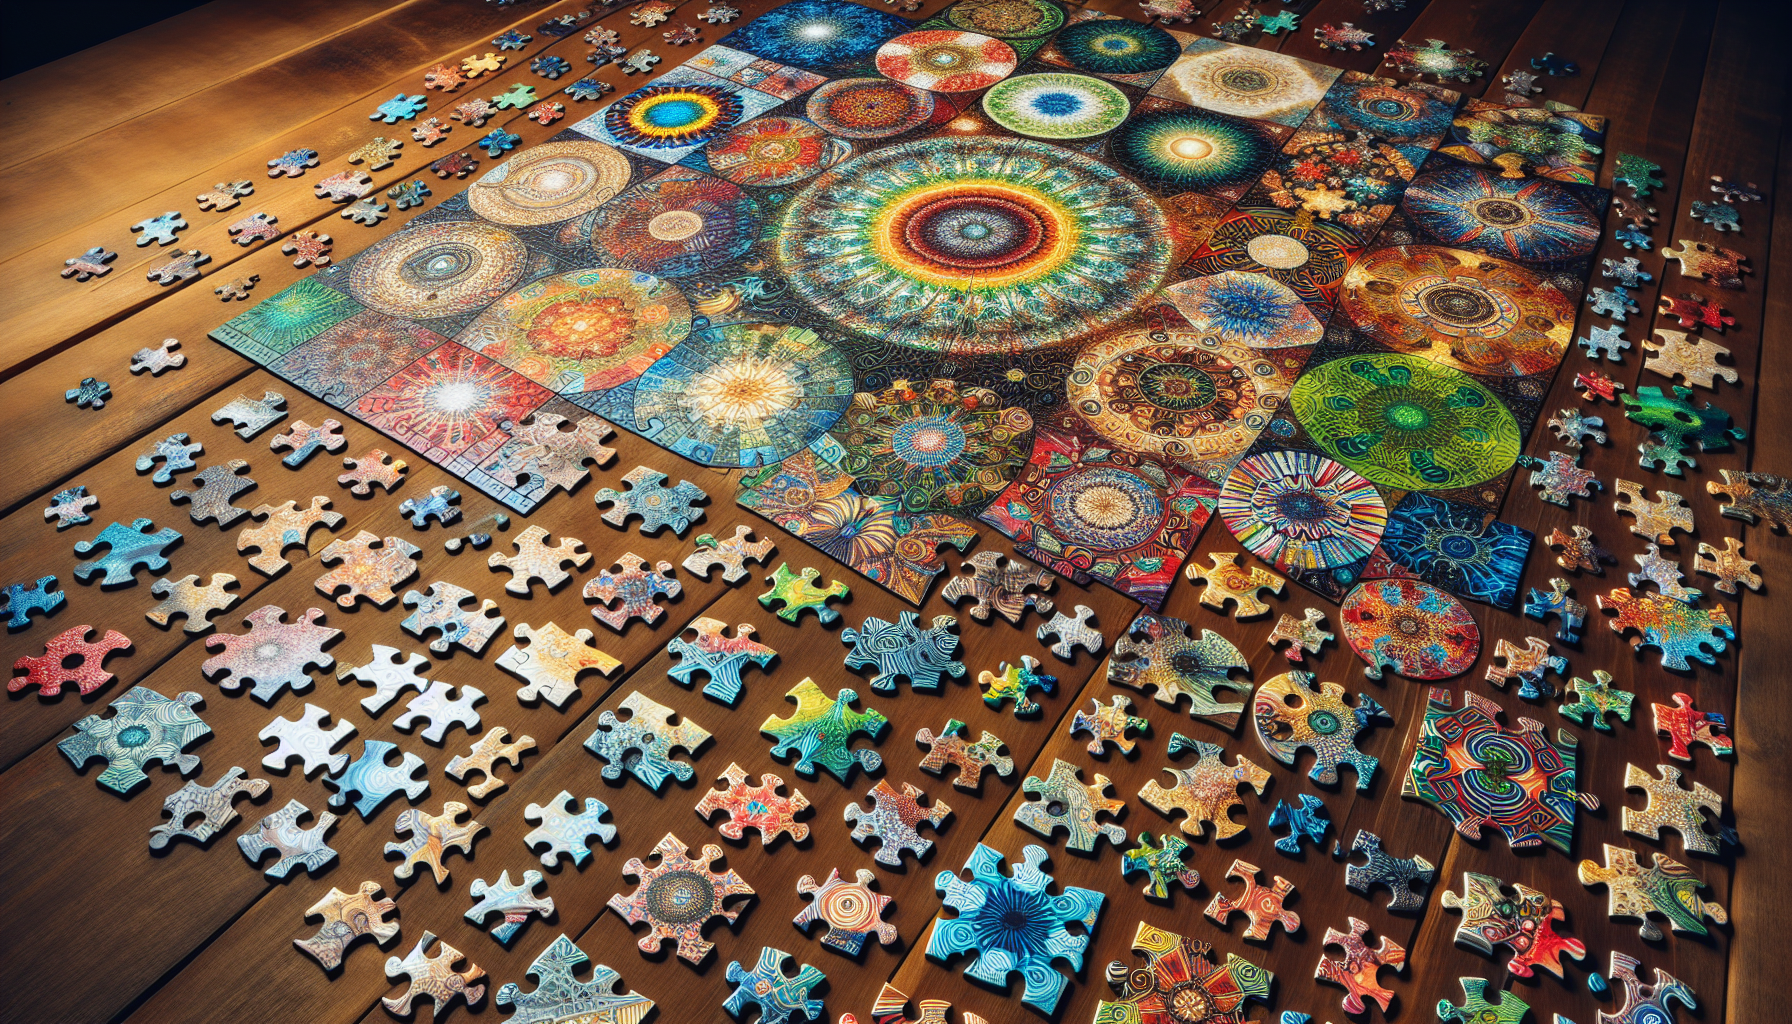 A variety of jigsaw puzzles spread out on a table